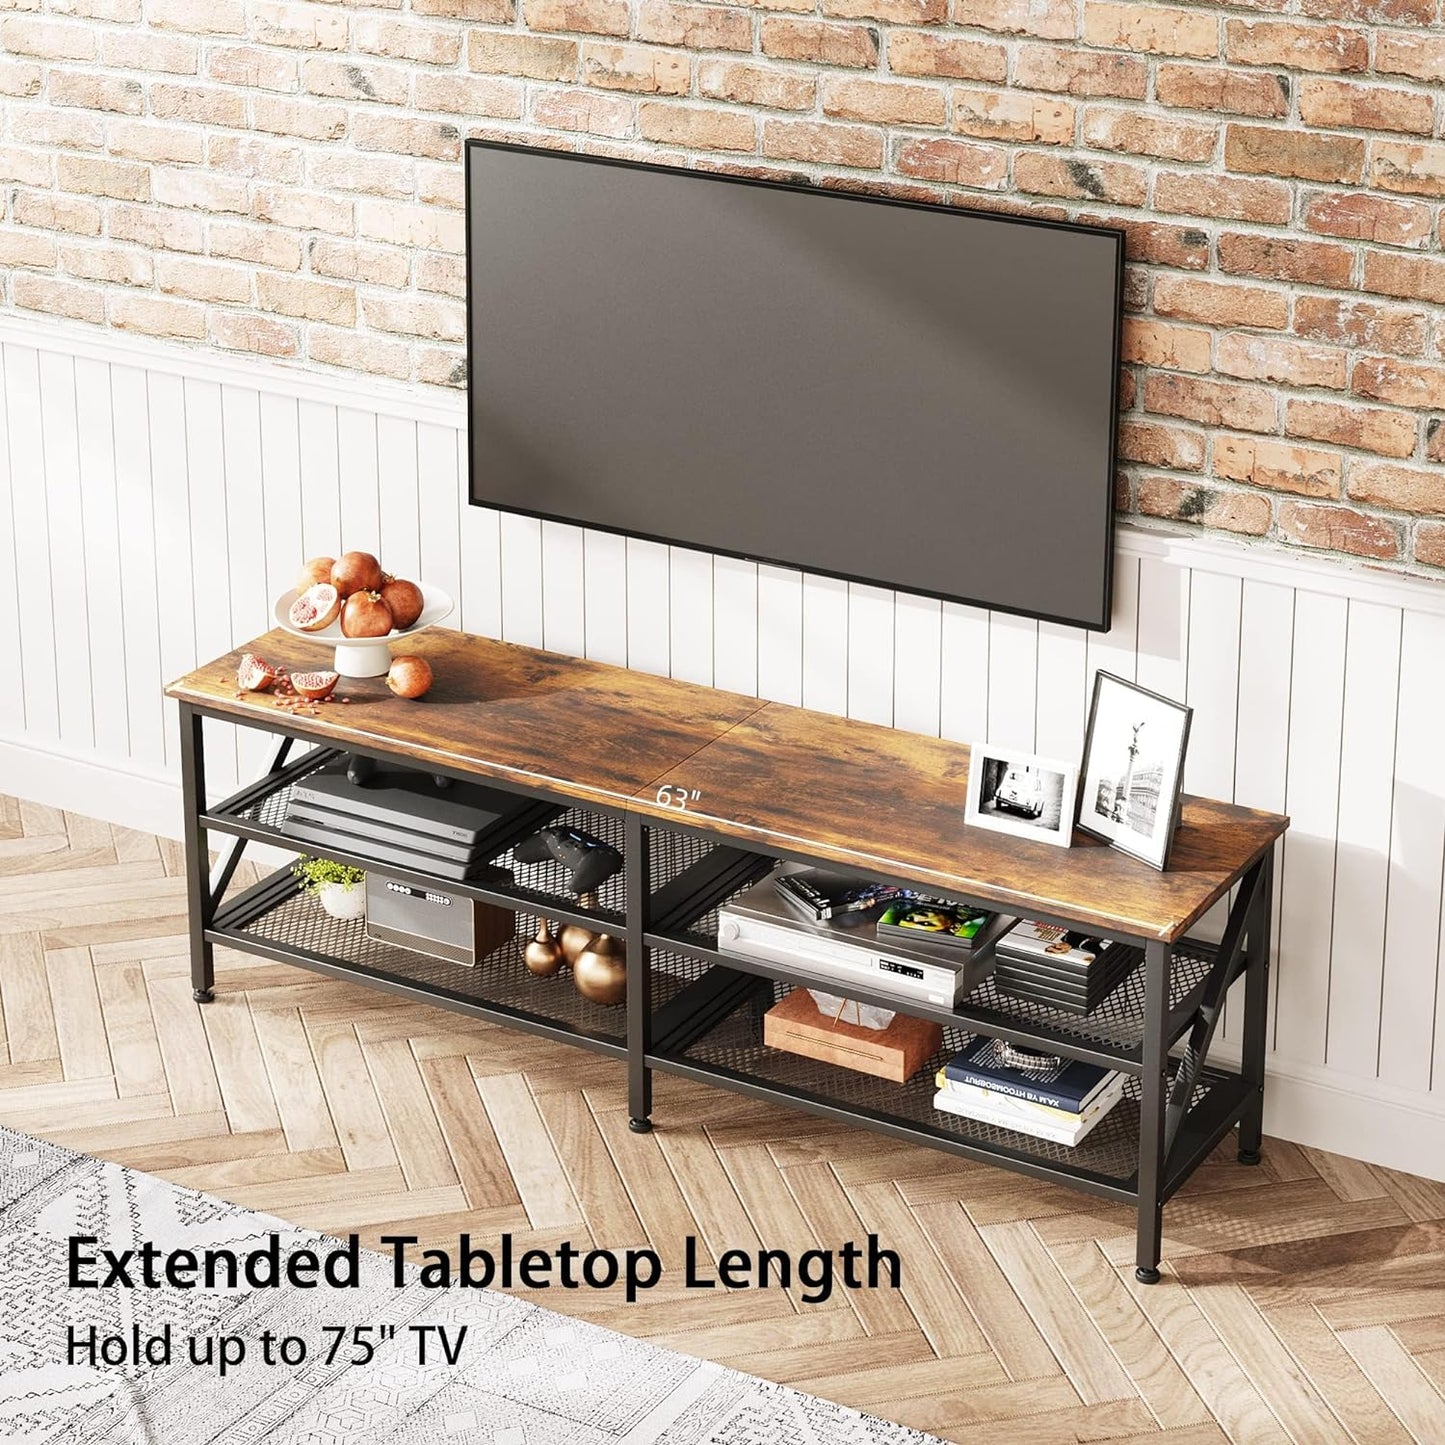 SKY-TOUCH TV Stand : Modern TV Table Wide TV Entertainment Center with Storage Shelves Sturdy Wooden TV Console Table with Metal Frame for Living Room (160 * 40 * 50CM Tiger Wood)